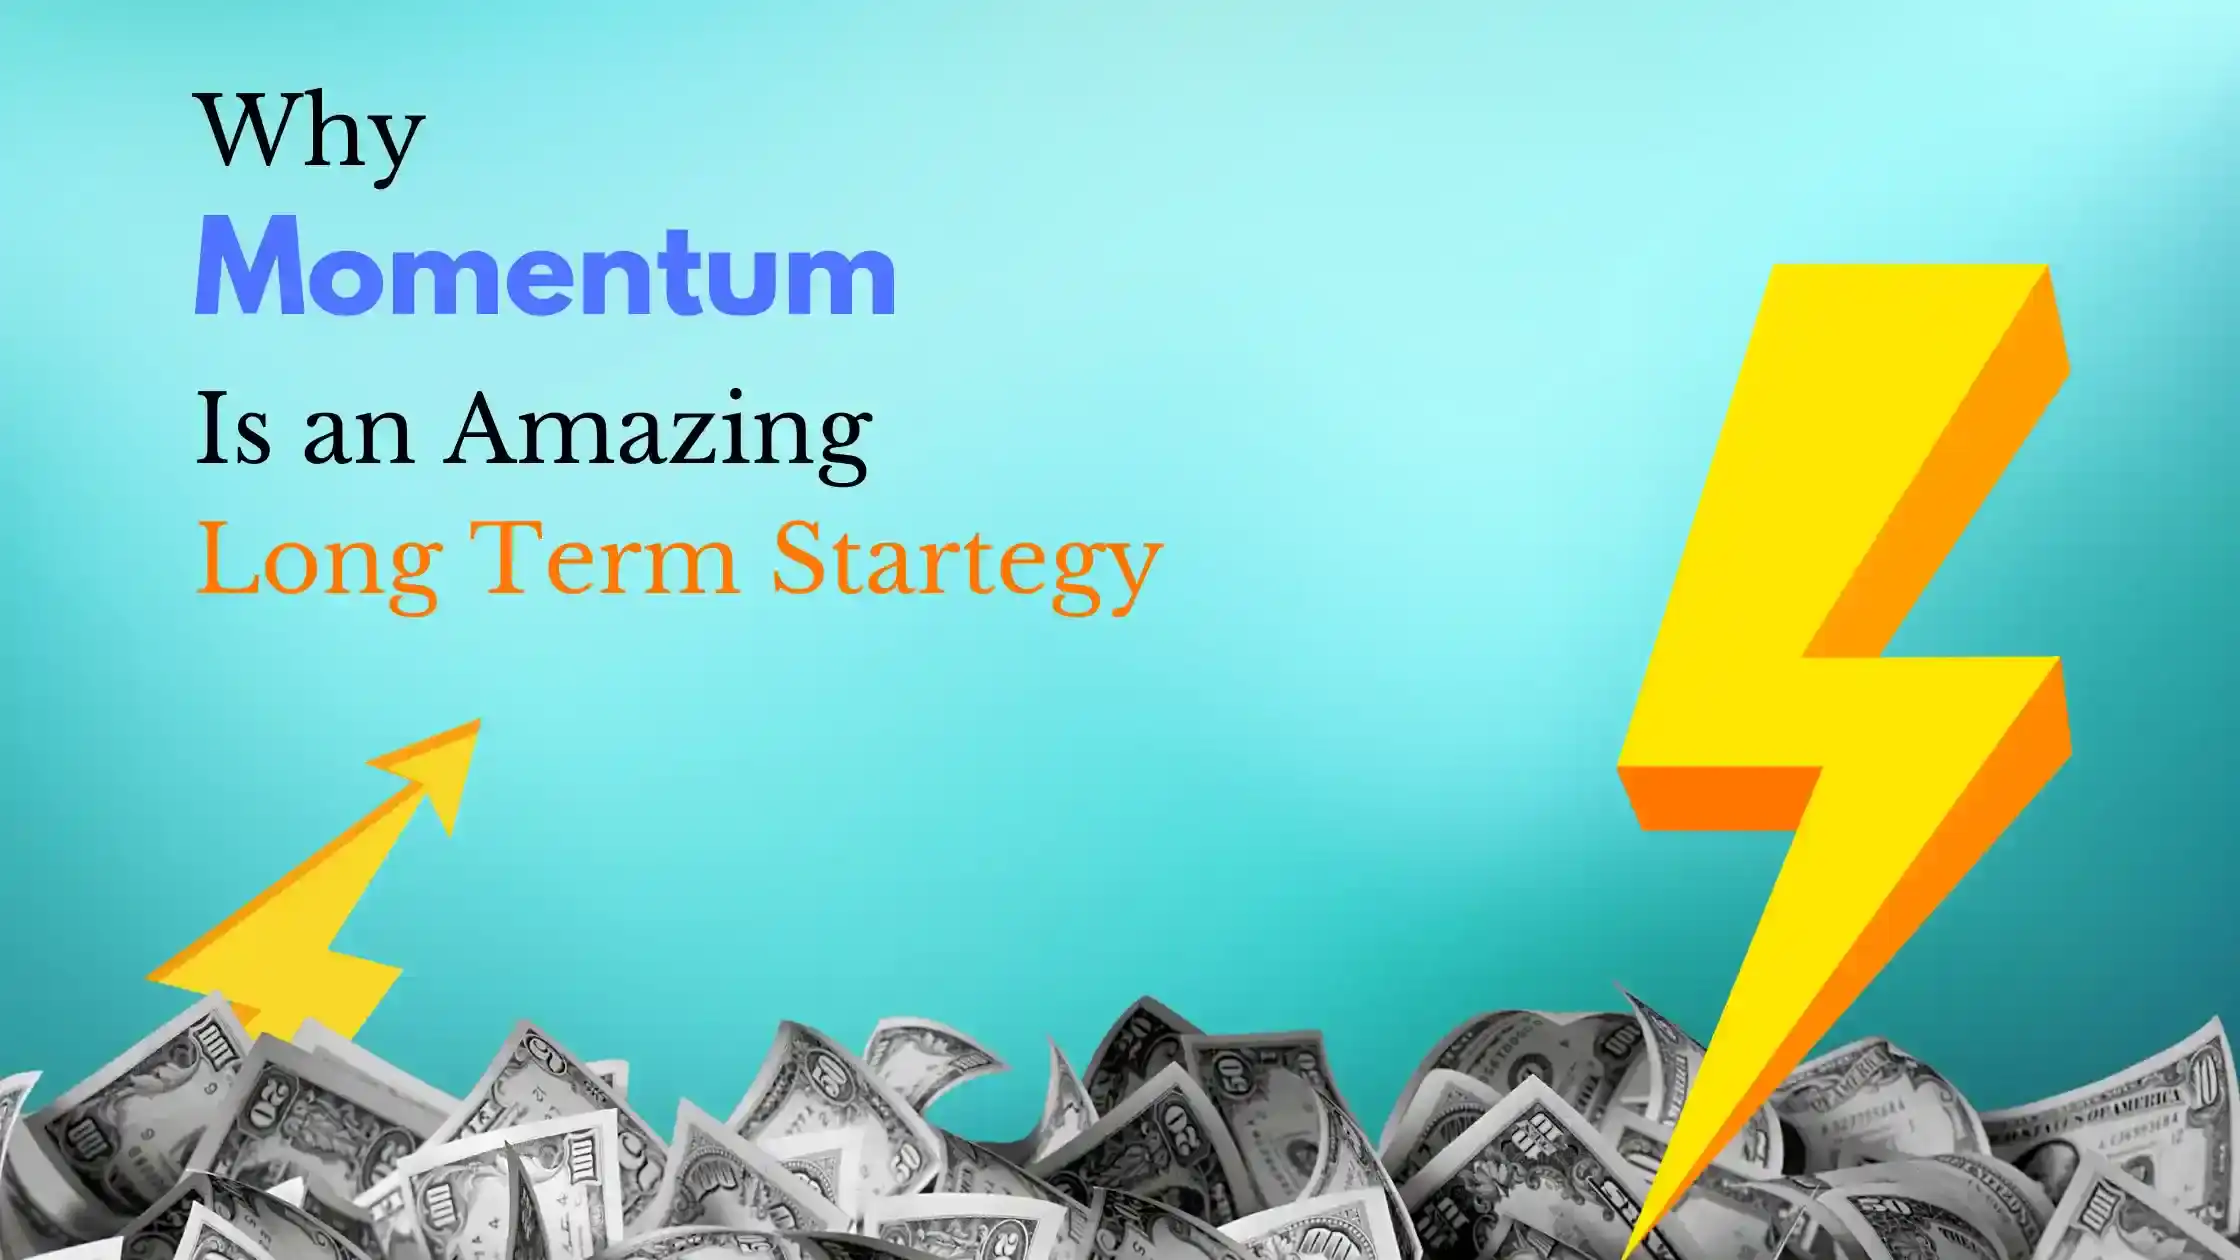 Momentum is an amazing Long Term strategy